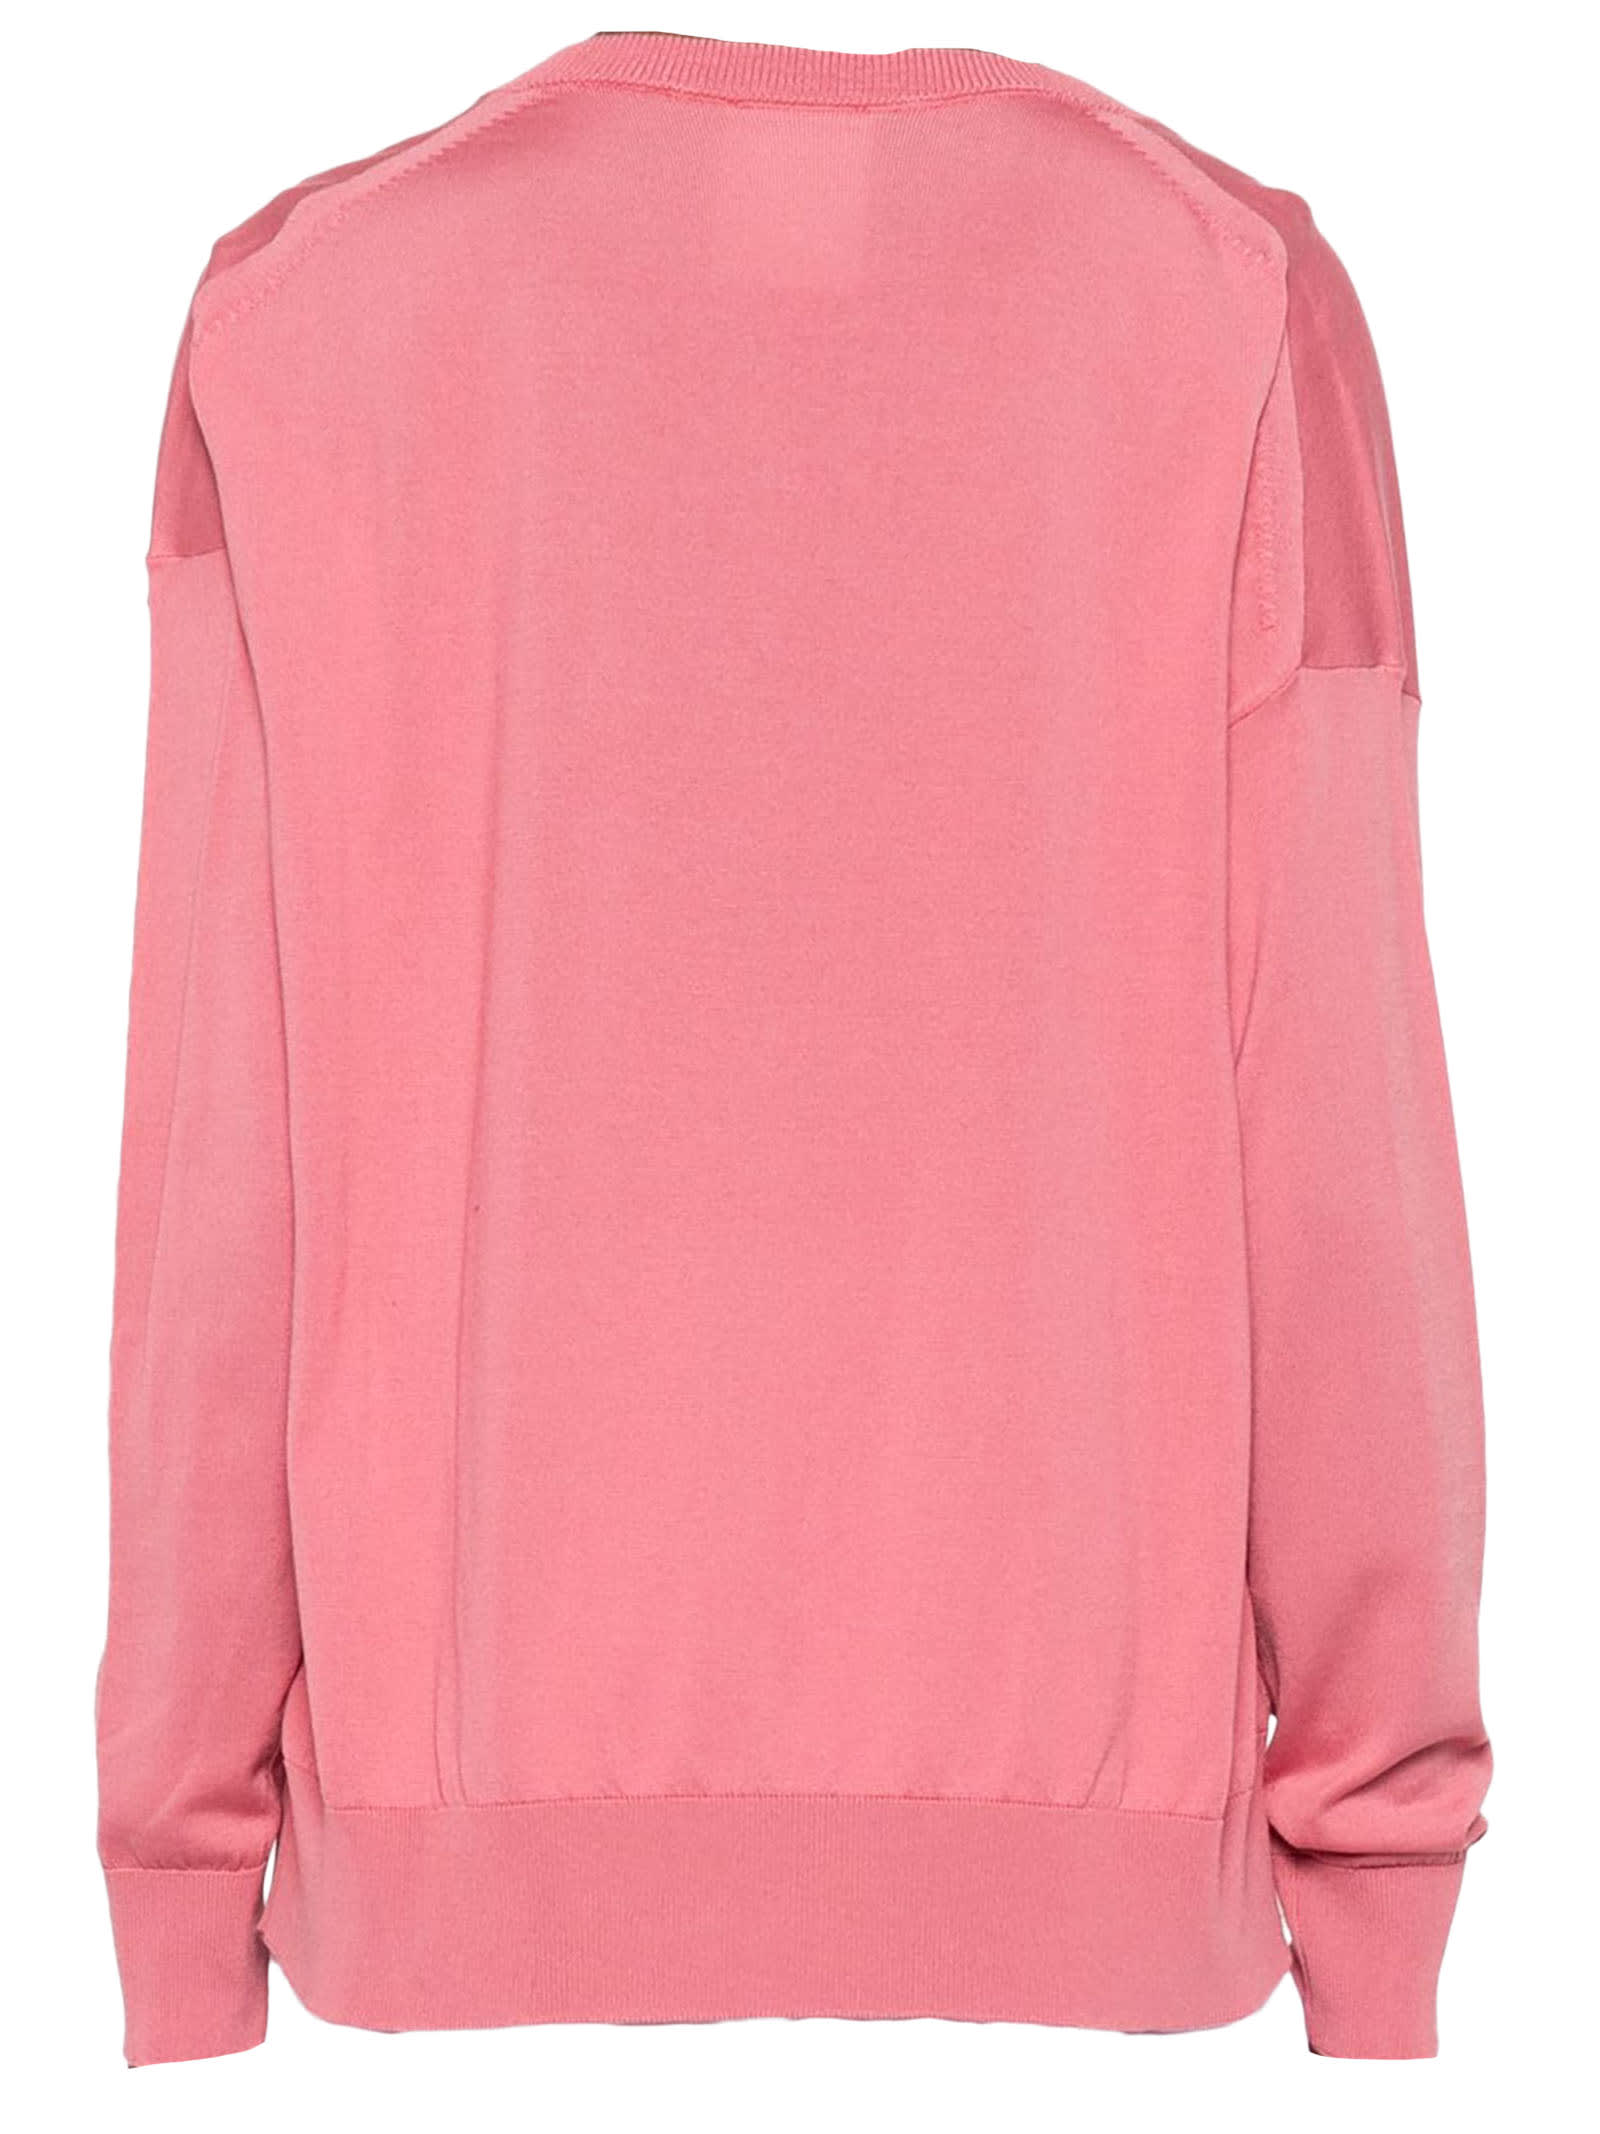 Shop Semicouture Pink Cotton Sweater